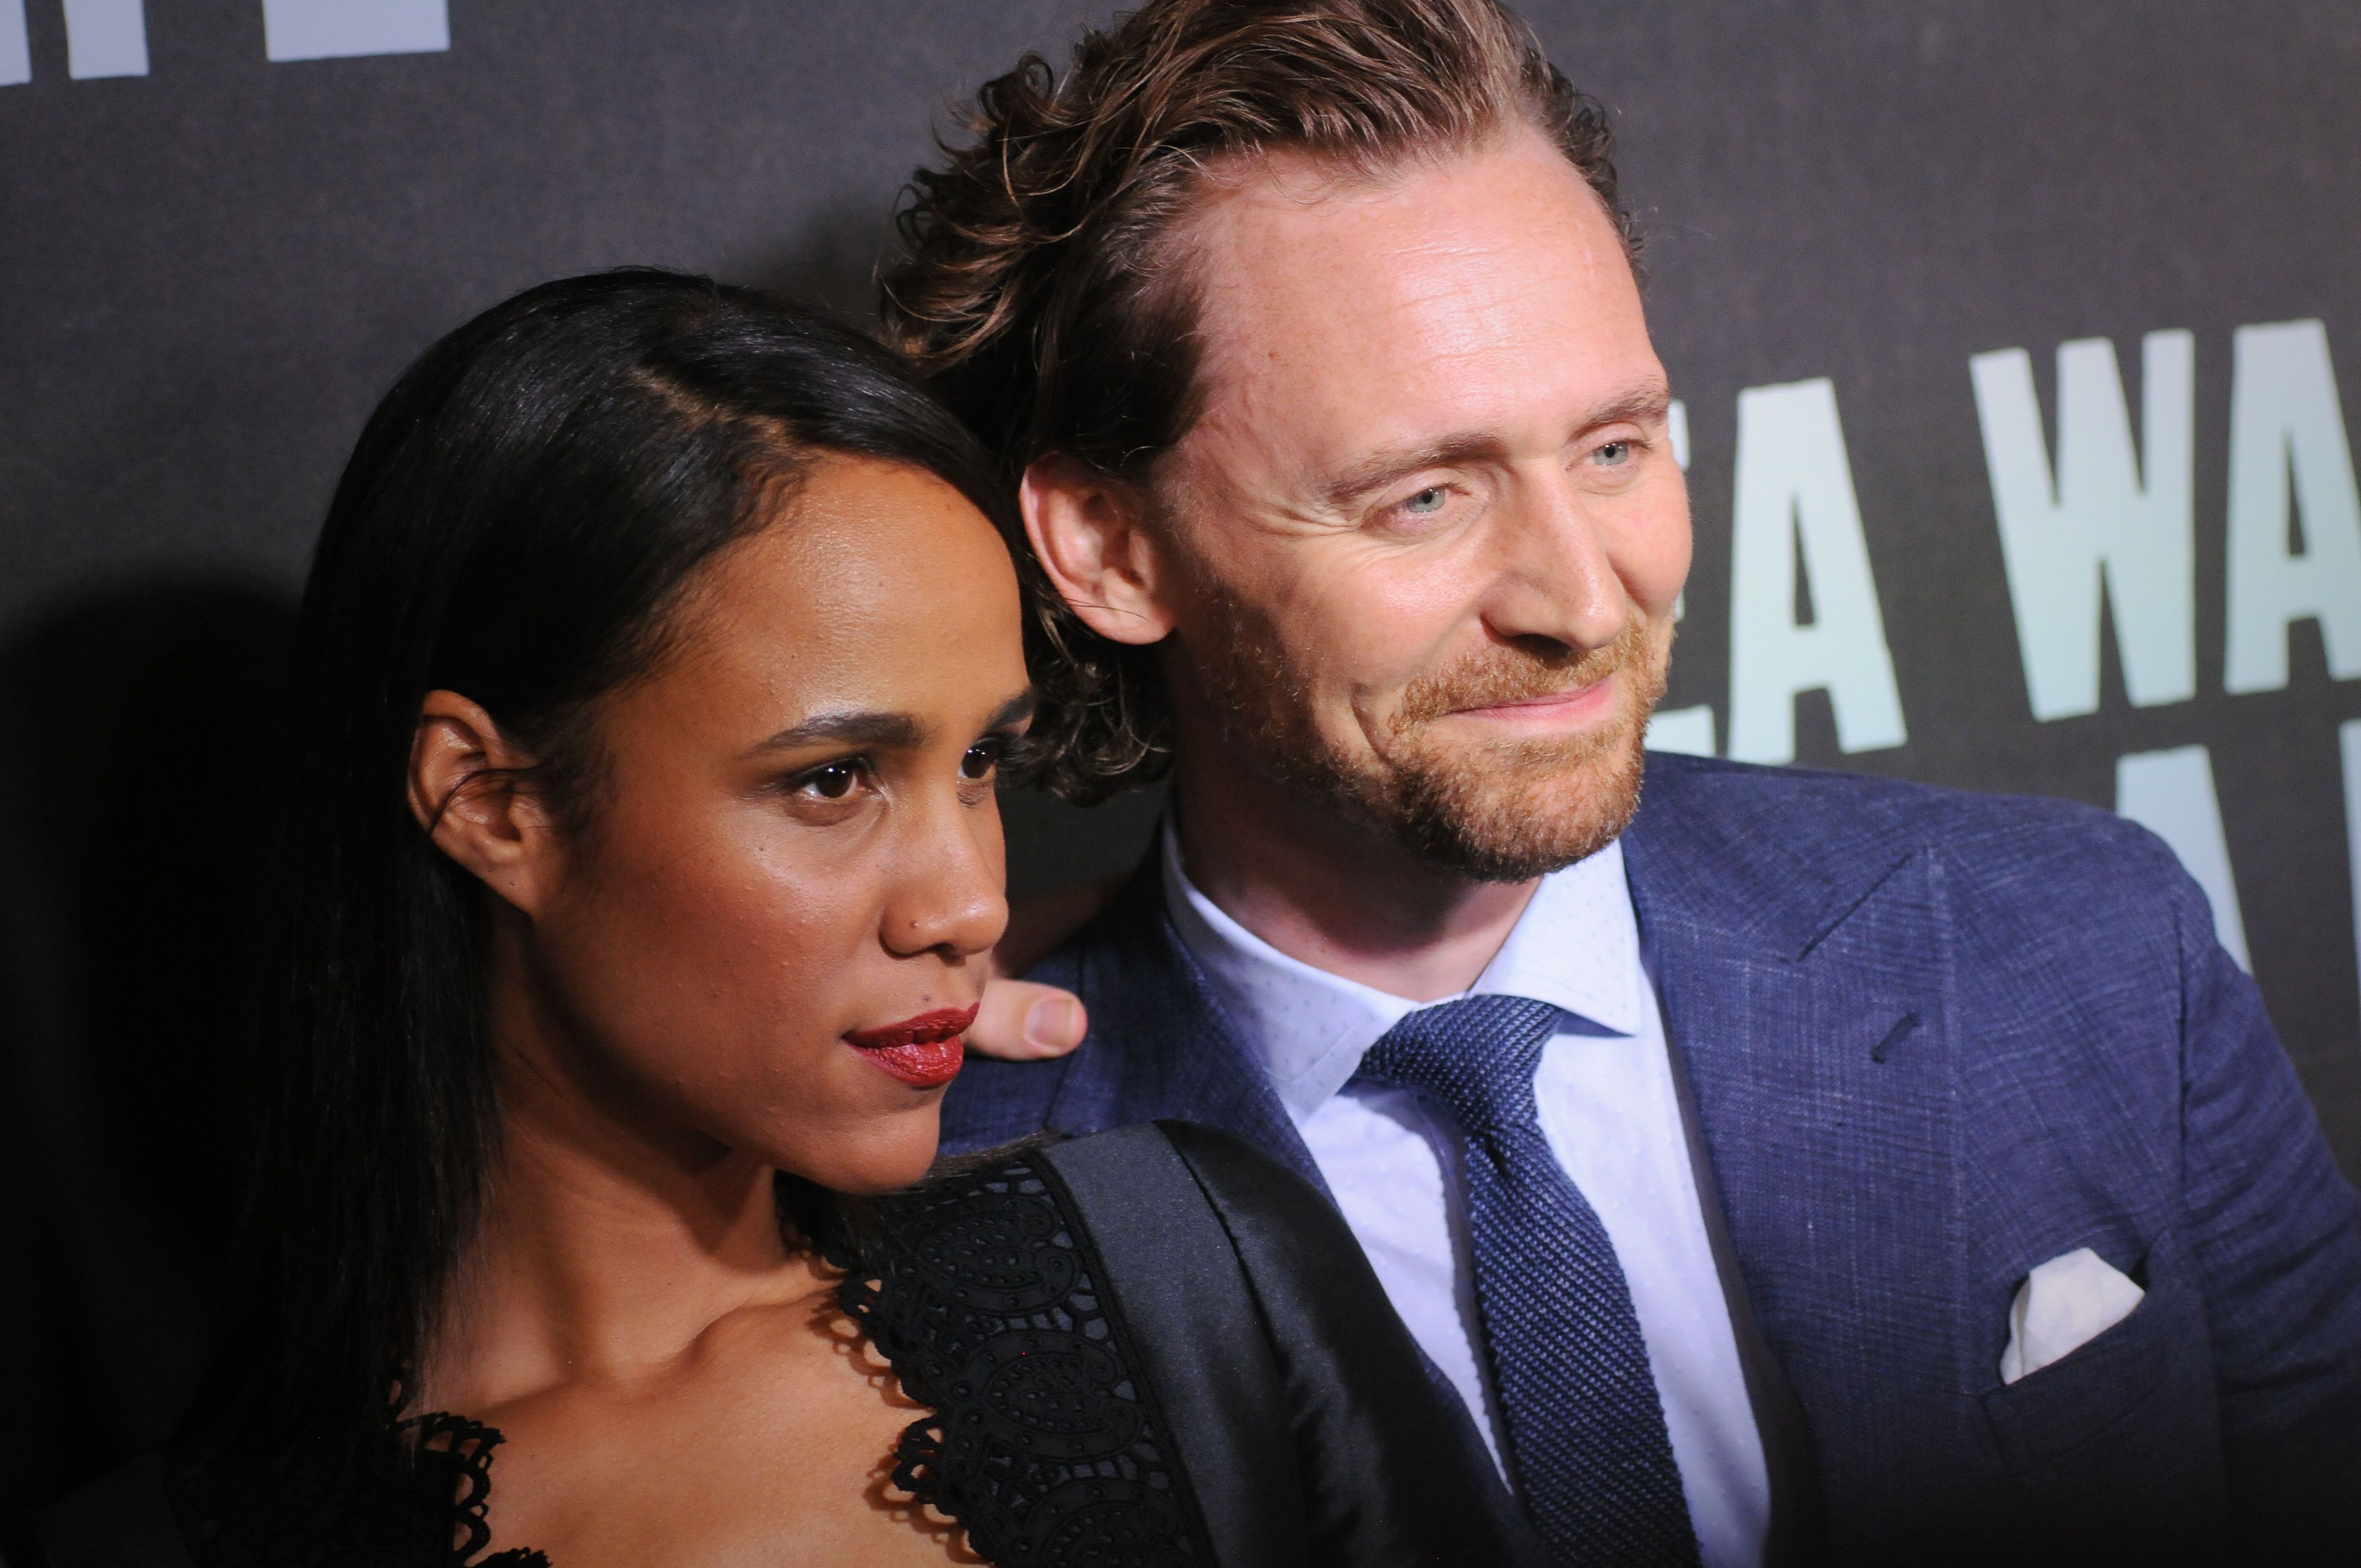 Zawe Ashton and Tom HIddleston during the "Sea Wall / A Life" Broadway Opening Night at the Hudson Theater in New York. | Source: Getty Images